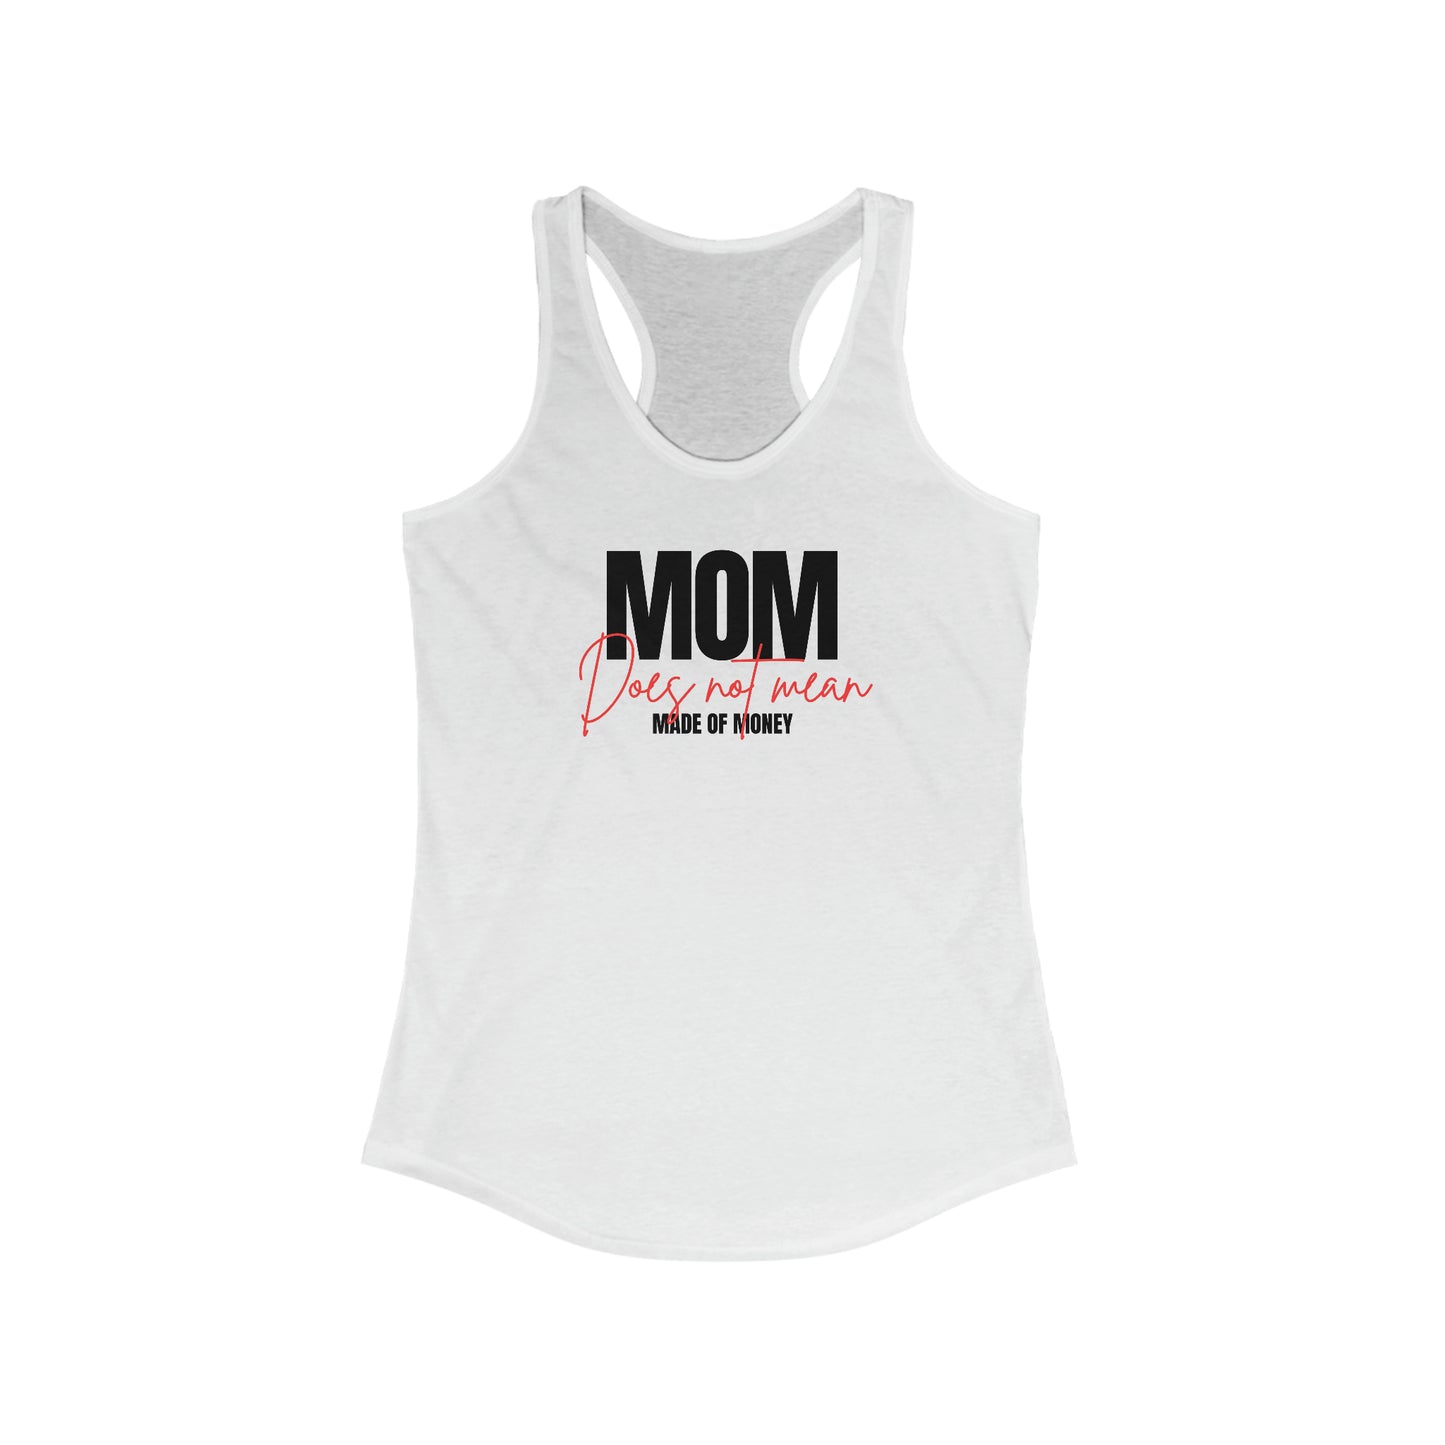 Women's "'MOM does not mean Made of Money'" Racerback Tank Red Edition